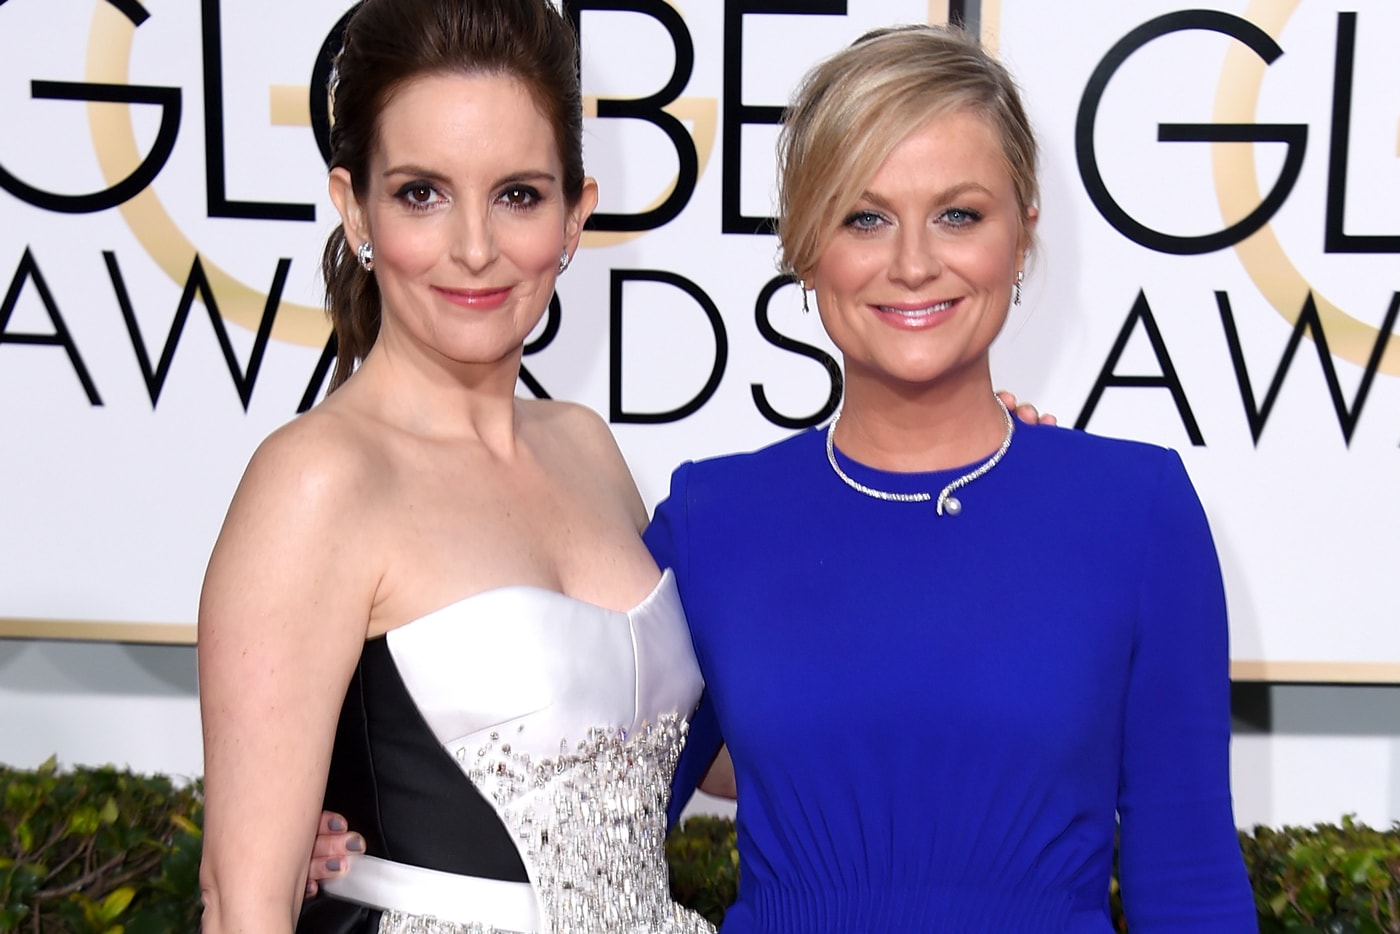 Tina Fey Amy Poehler Host 2021 Golden Globes awards ricky gervais 30 rock parks and recreation